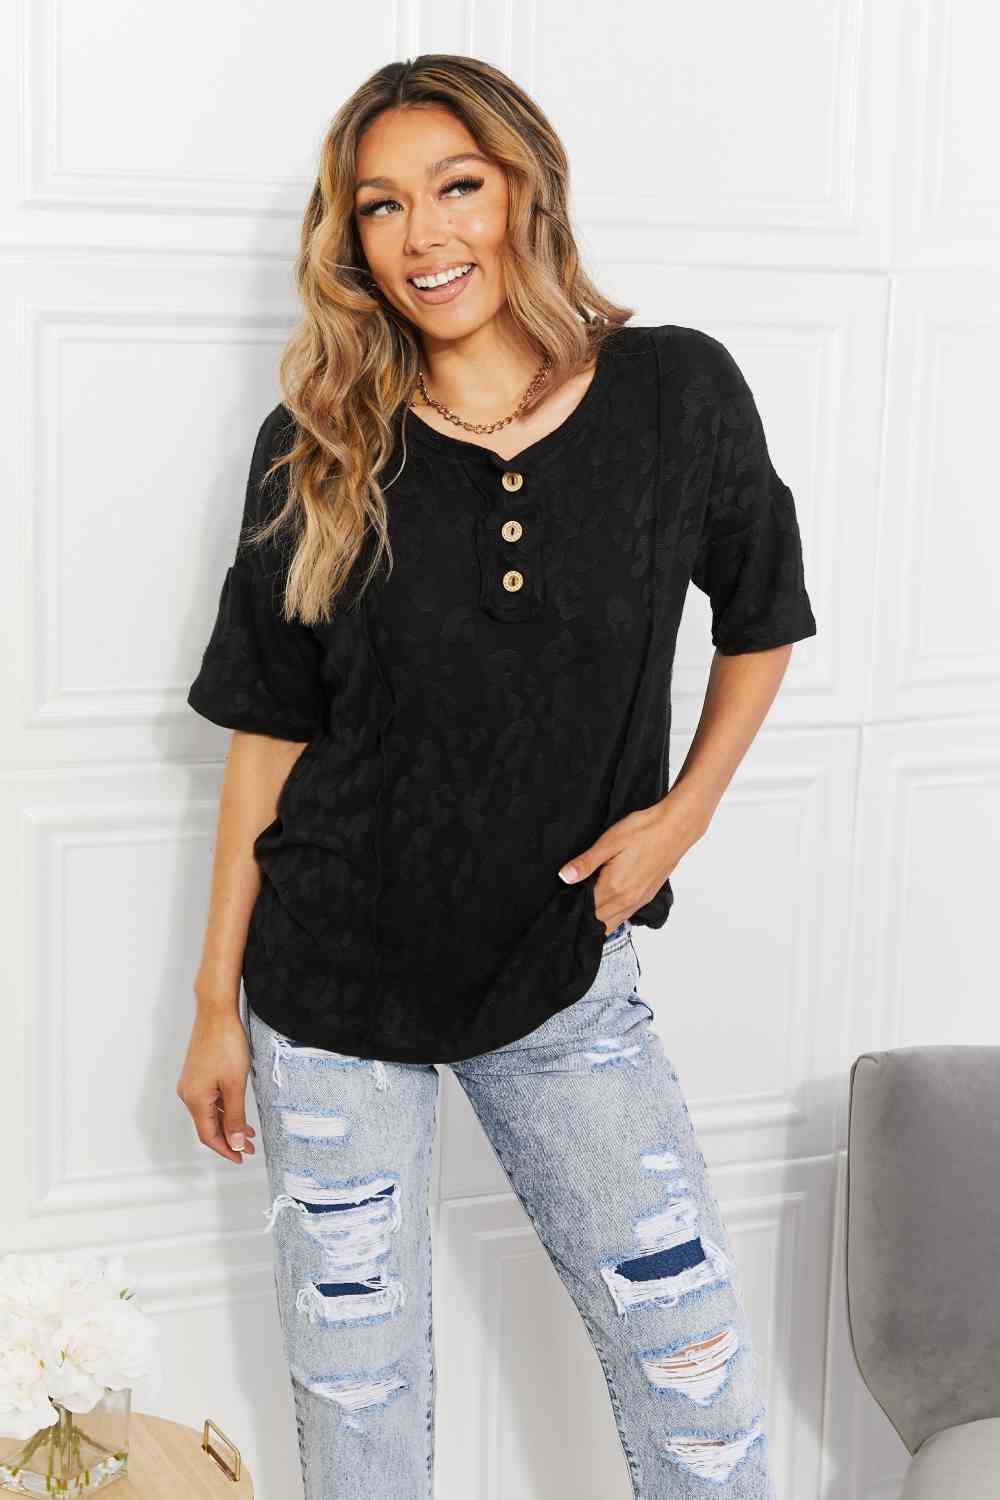 BOMBOM At The Fair Animal Textured Top in Black Black